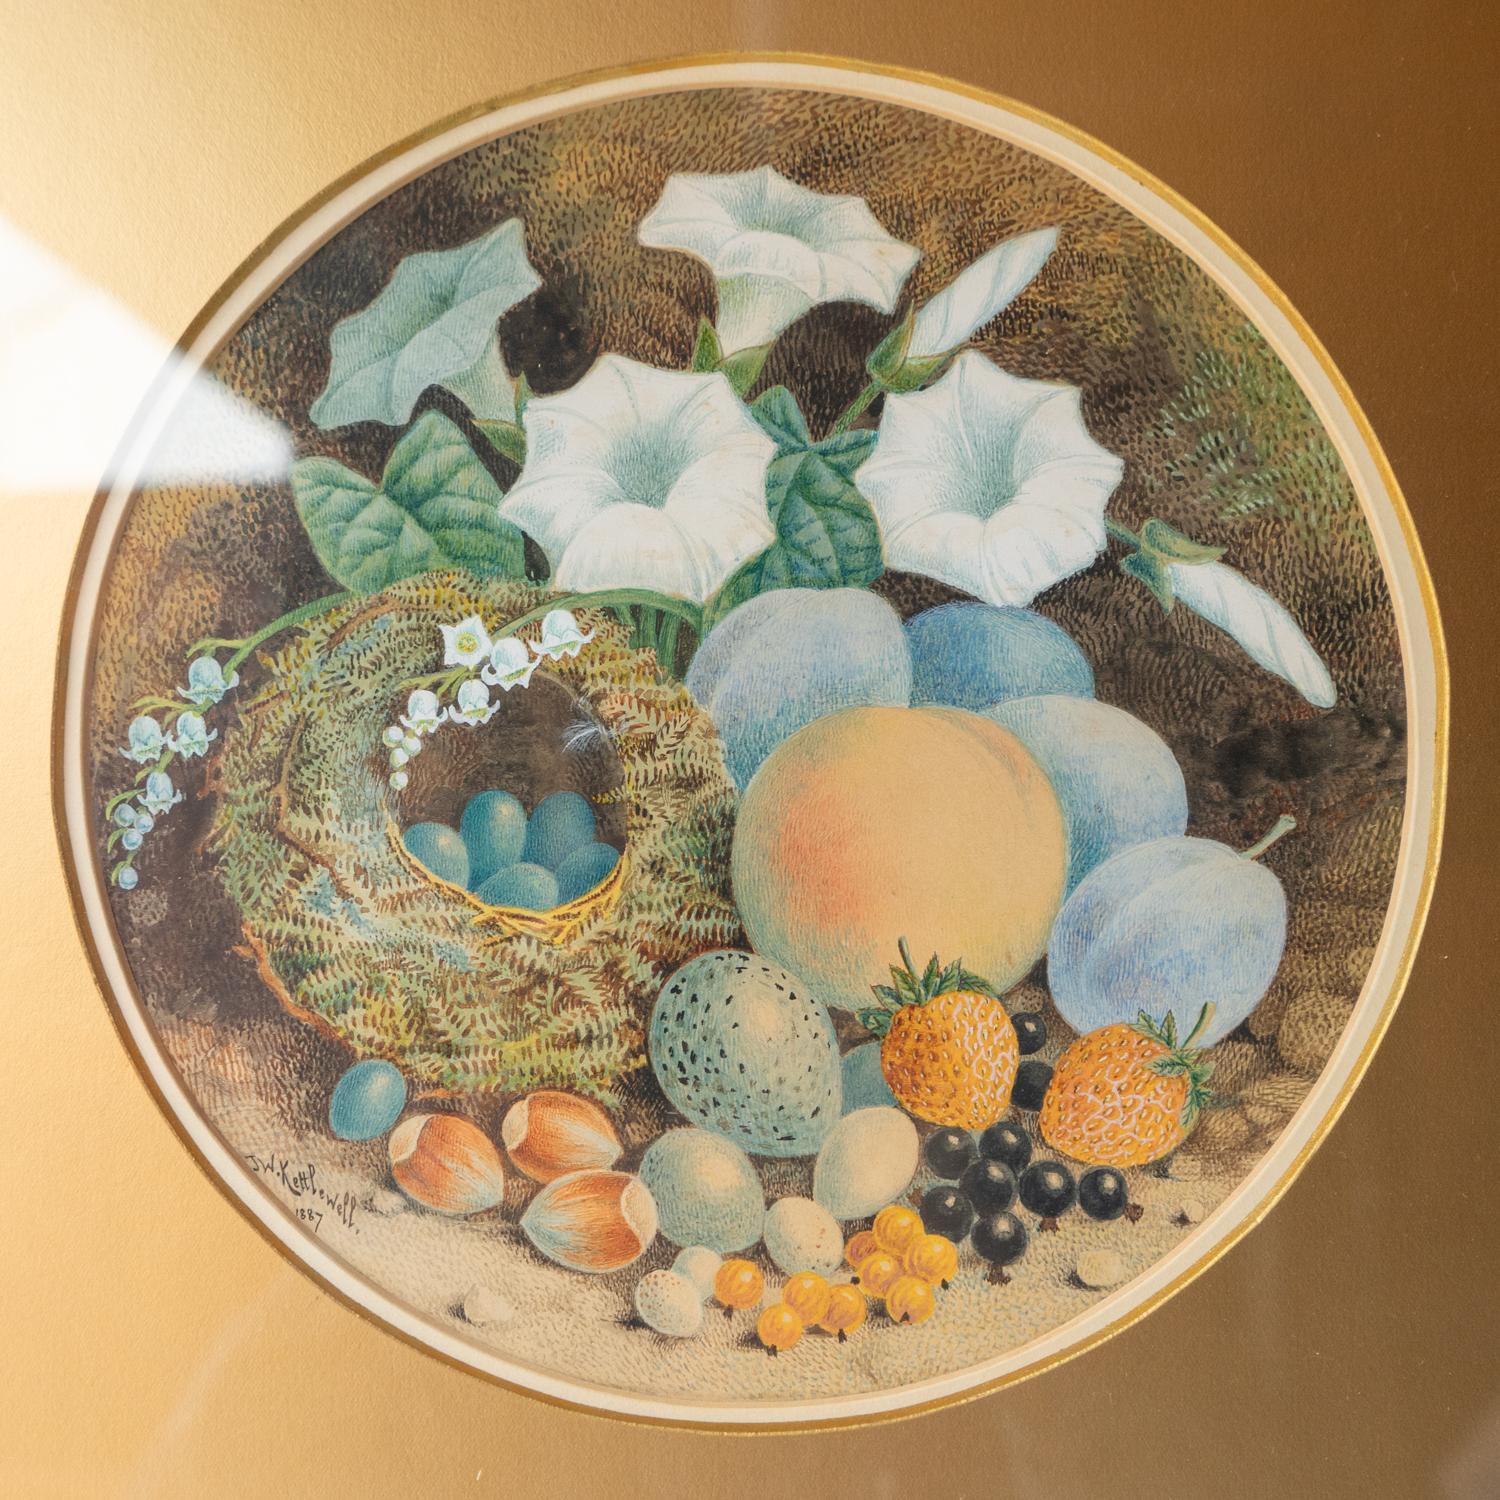 Painted Still Life Painting Of Birds Nest With Eggs, Fruit & Flowers By J. W. Kettlewell For Sale